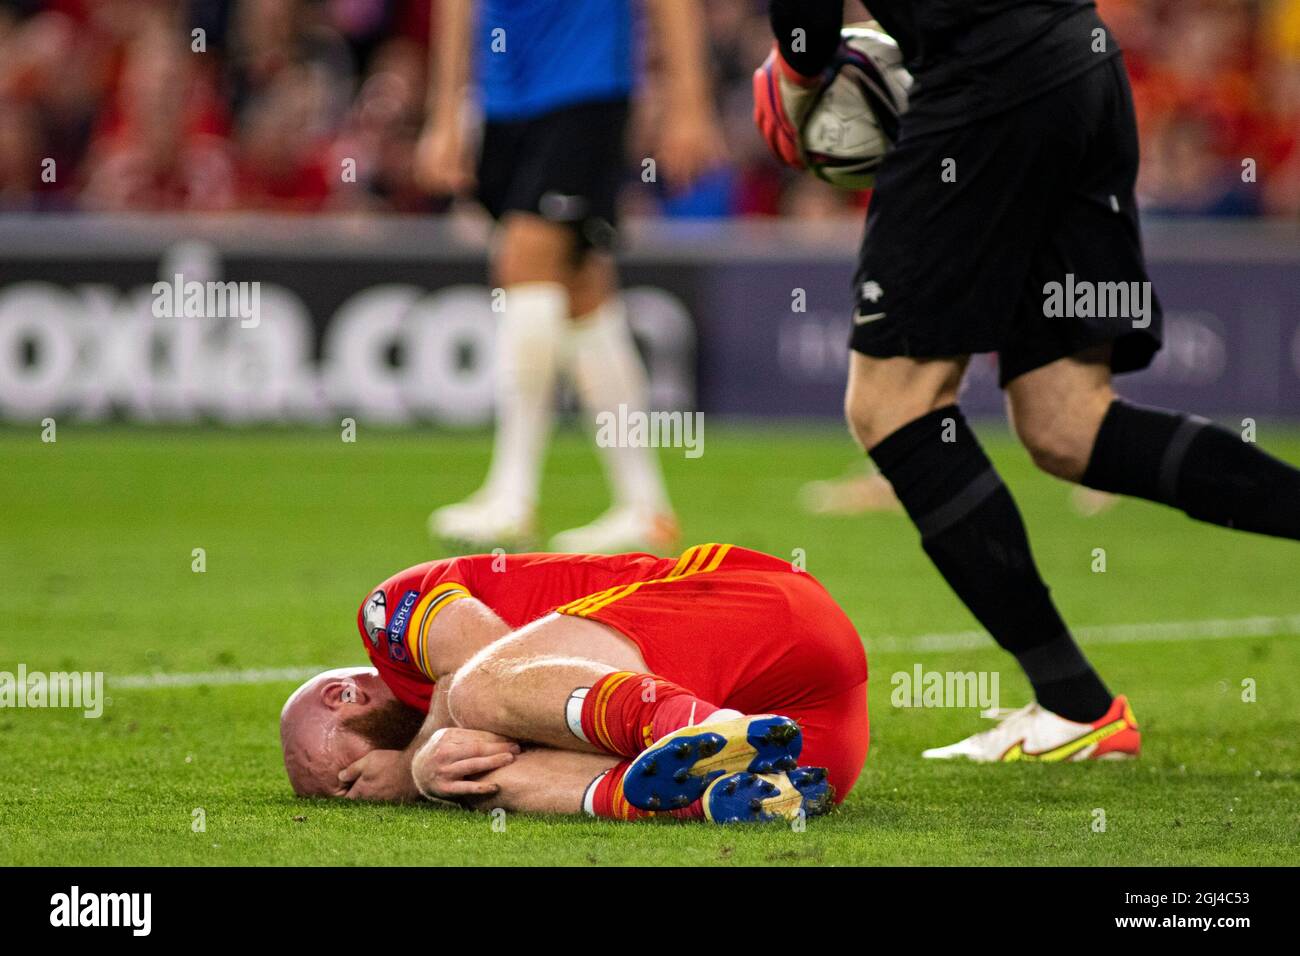 Cardiff, UK. 08th Sep, 2021. Estonia goalkeeper Karl Jakob Hein continues play with Jonny Williams of Wales down injured. Wales v Estonia in a 2022 FIFA World Cup Qualifier at the Cardiff City Stadium on the 8th September 2021. Credit: Lewis Mitchell/Alamy Live News Stock Photo